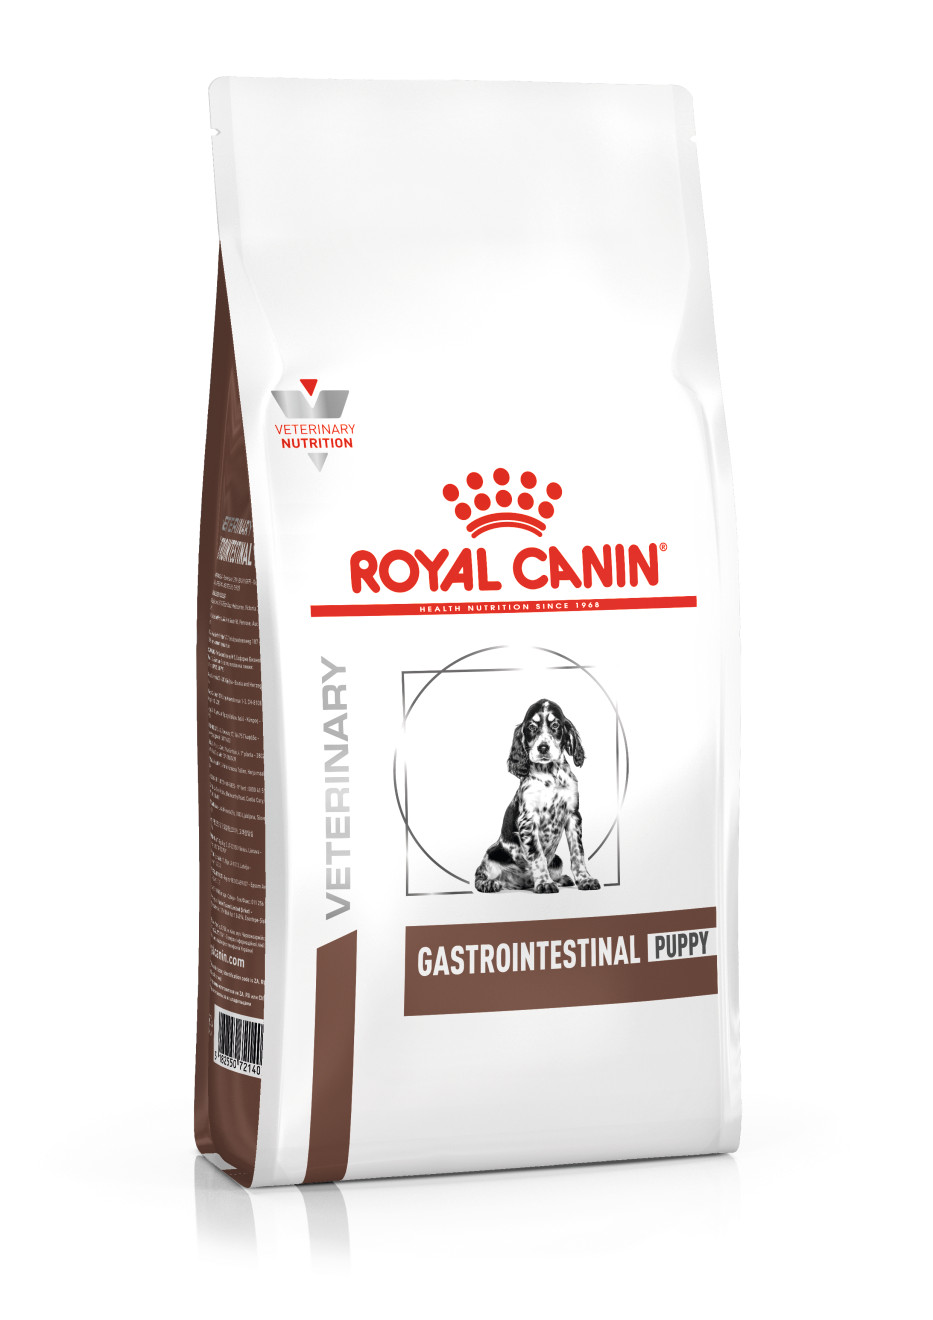 Royal Canin Veterinary Gastrointestinal Puppy Welpenfutter